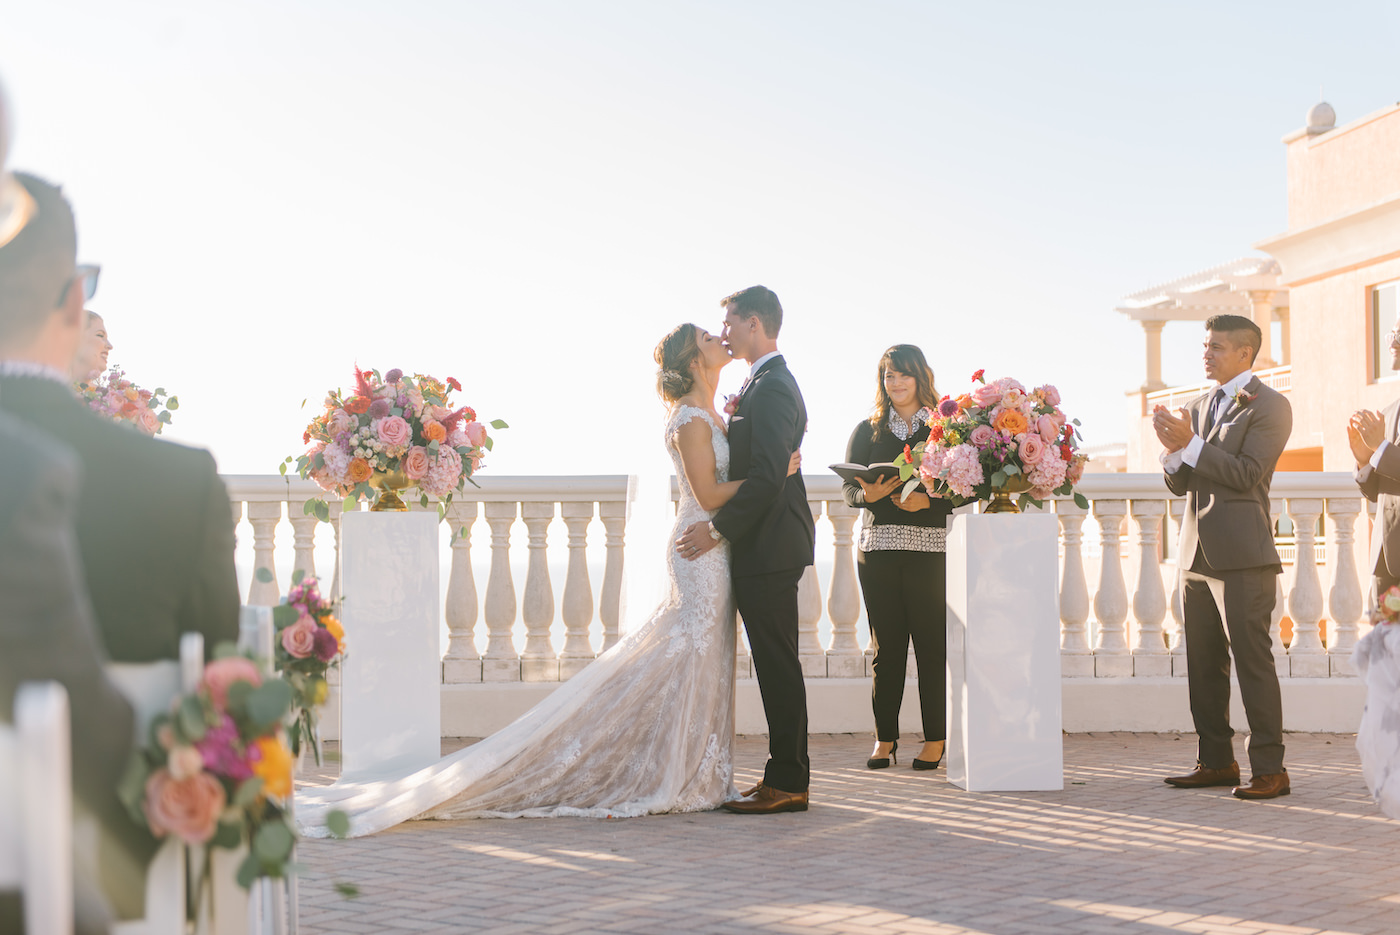 Bride and Groom First Kiss during Outdoor Rooftop Ceremony at Clearwater Wedding Venue Hyatt Regency Clearwater Beach | Ceremony Backdrop White Pillars topped with Colorful Vibrant Tropical Floral Arrangements | Tampa Bay Wedding Photographer Kera Photography